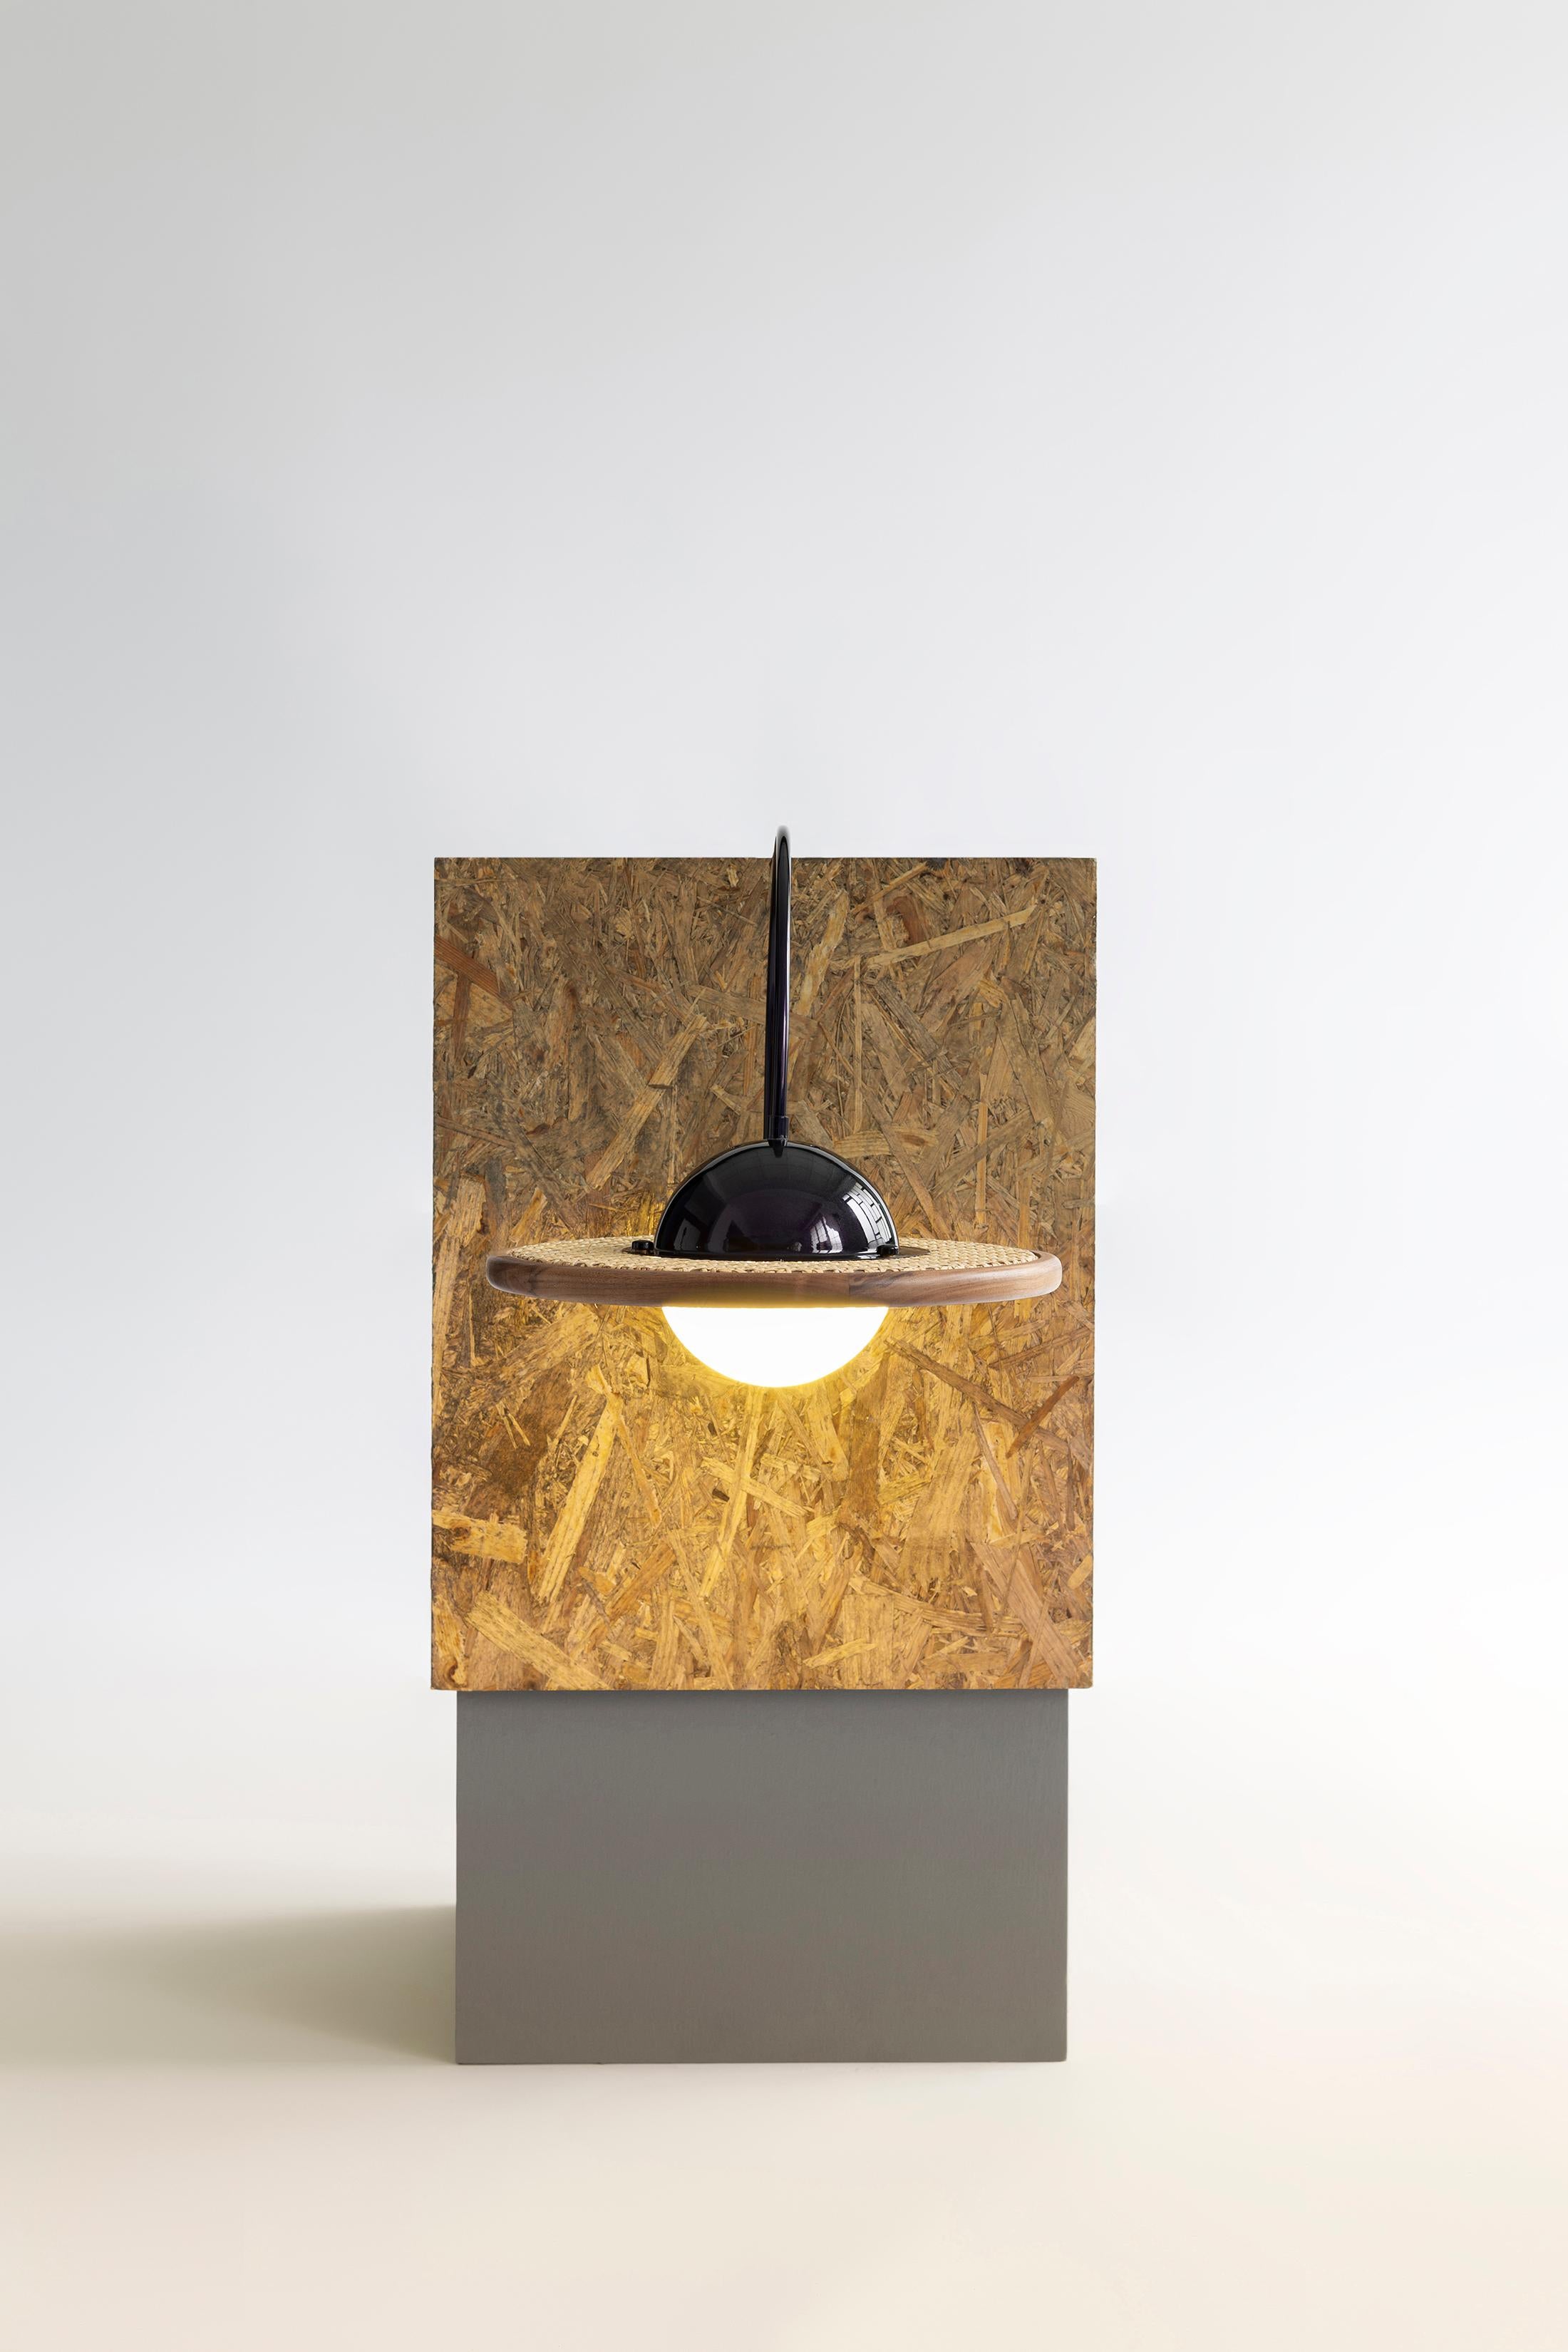 Cassini lamps are named after the famous “Cassini–Huygens” Mission which was a collaboration between NASA, the European Space Agency (ESA), and the Italian Space Agency (ASI) to send a probe to study the planet Saturn and its system. Cassini-Huygens